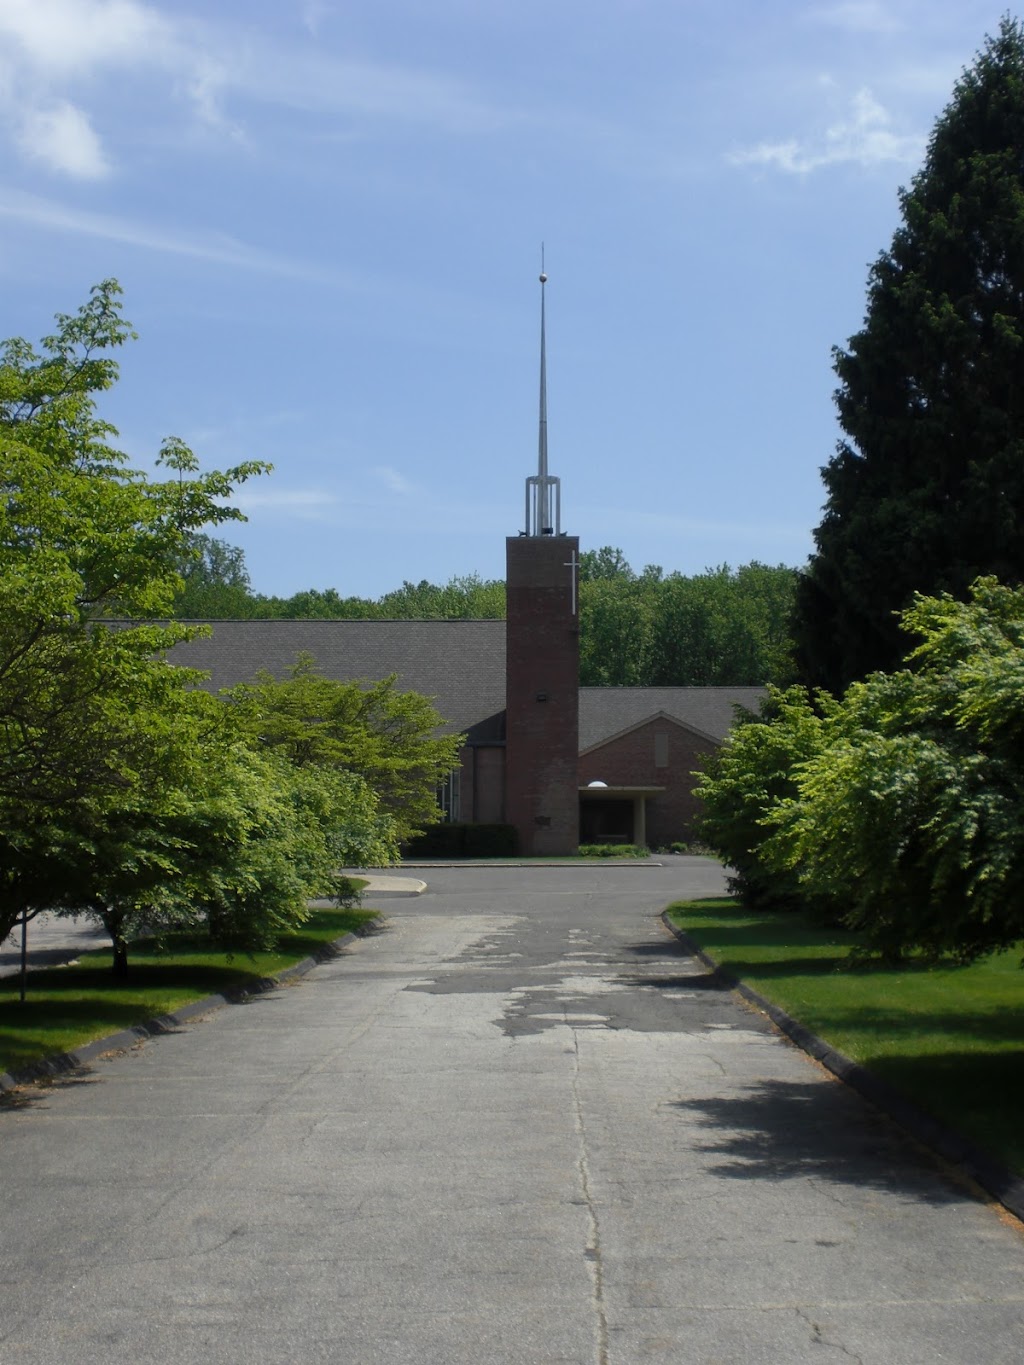 St. Francis of Assisi Parish | 35 Norfield Rd, Weston, CT 06883 | Phone: (203) 227-1341